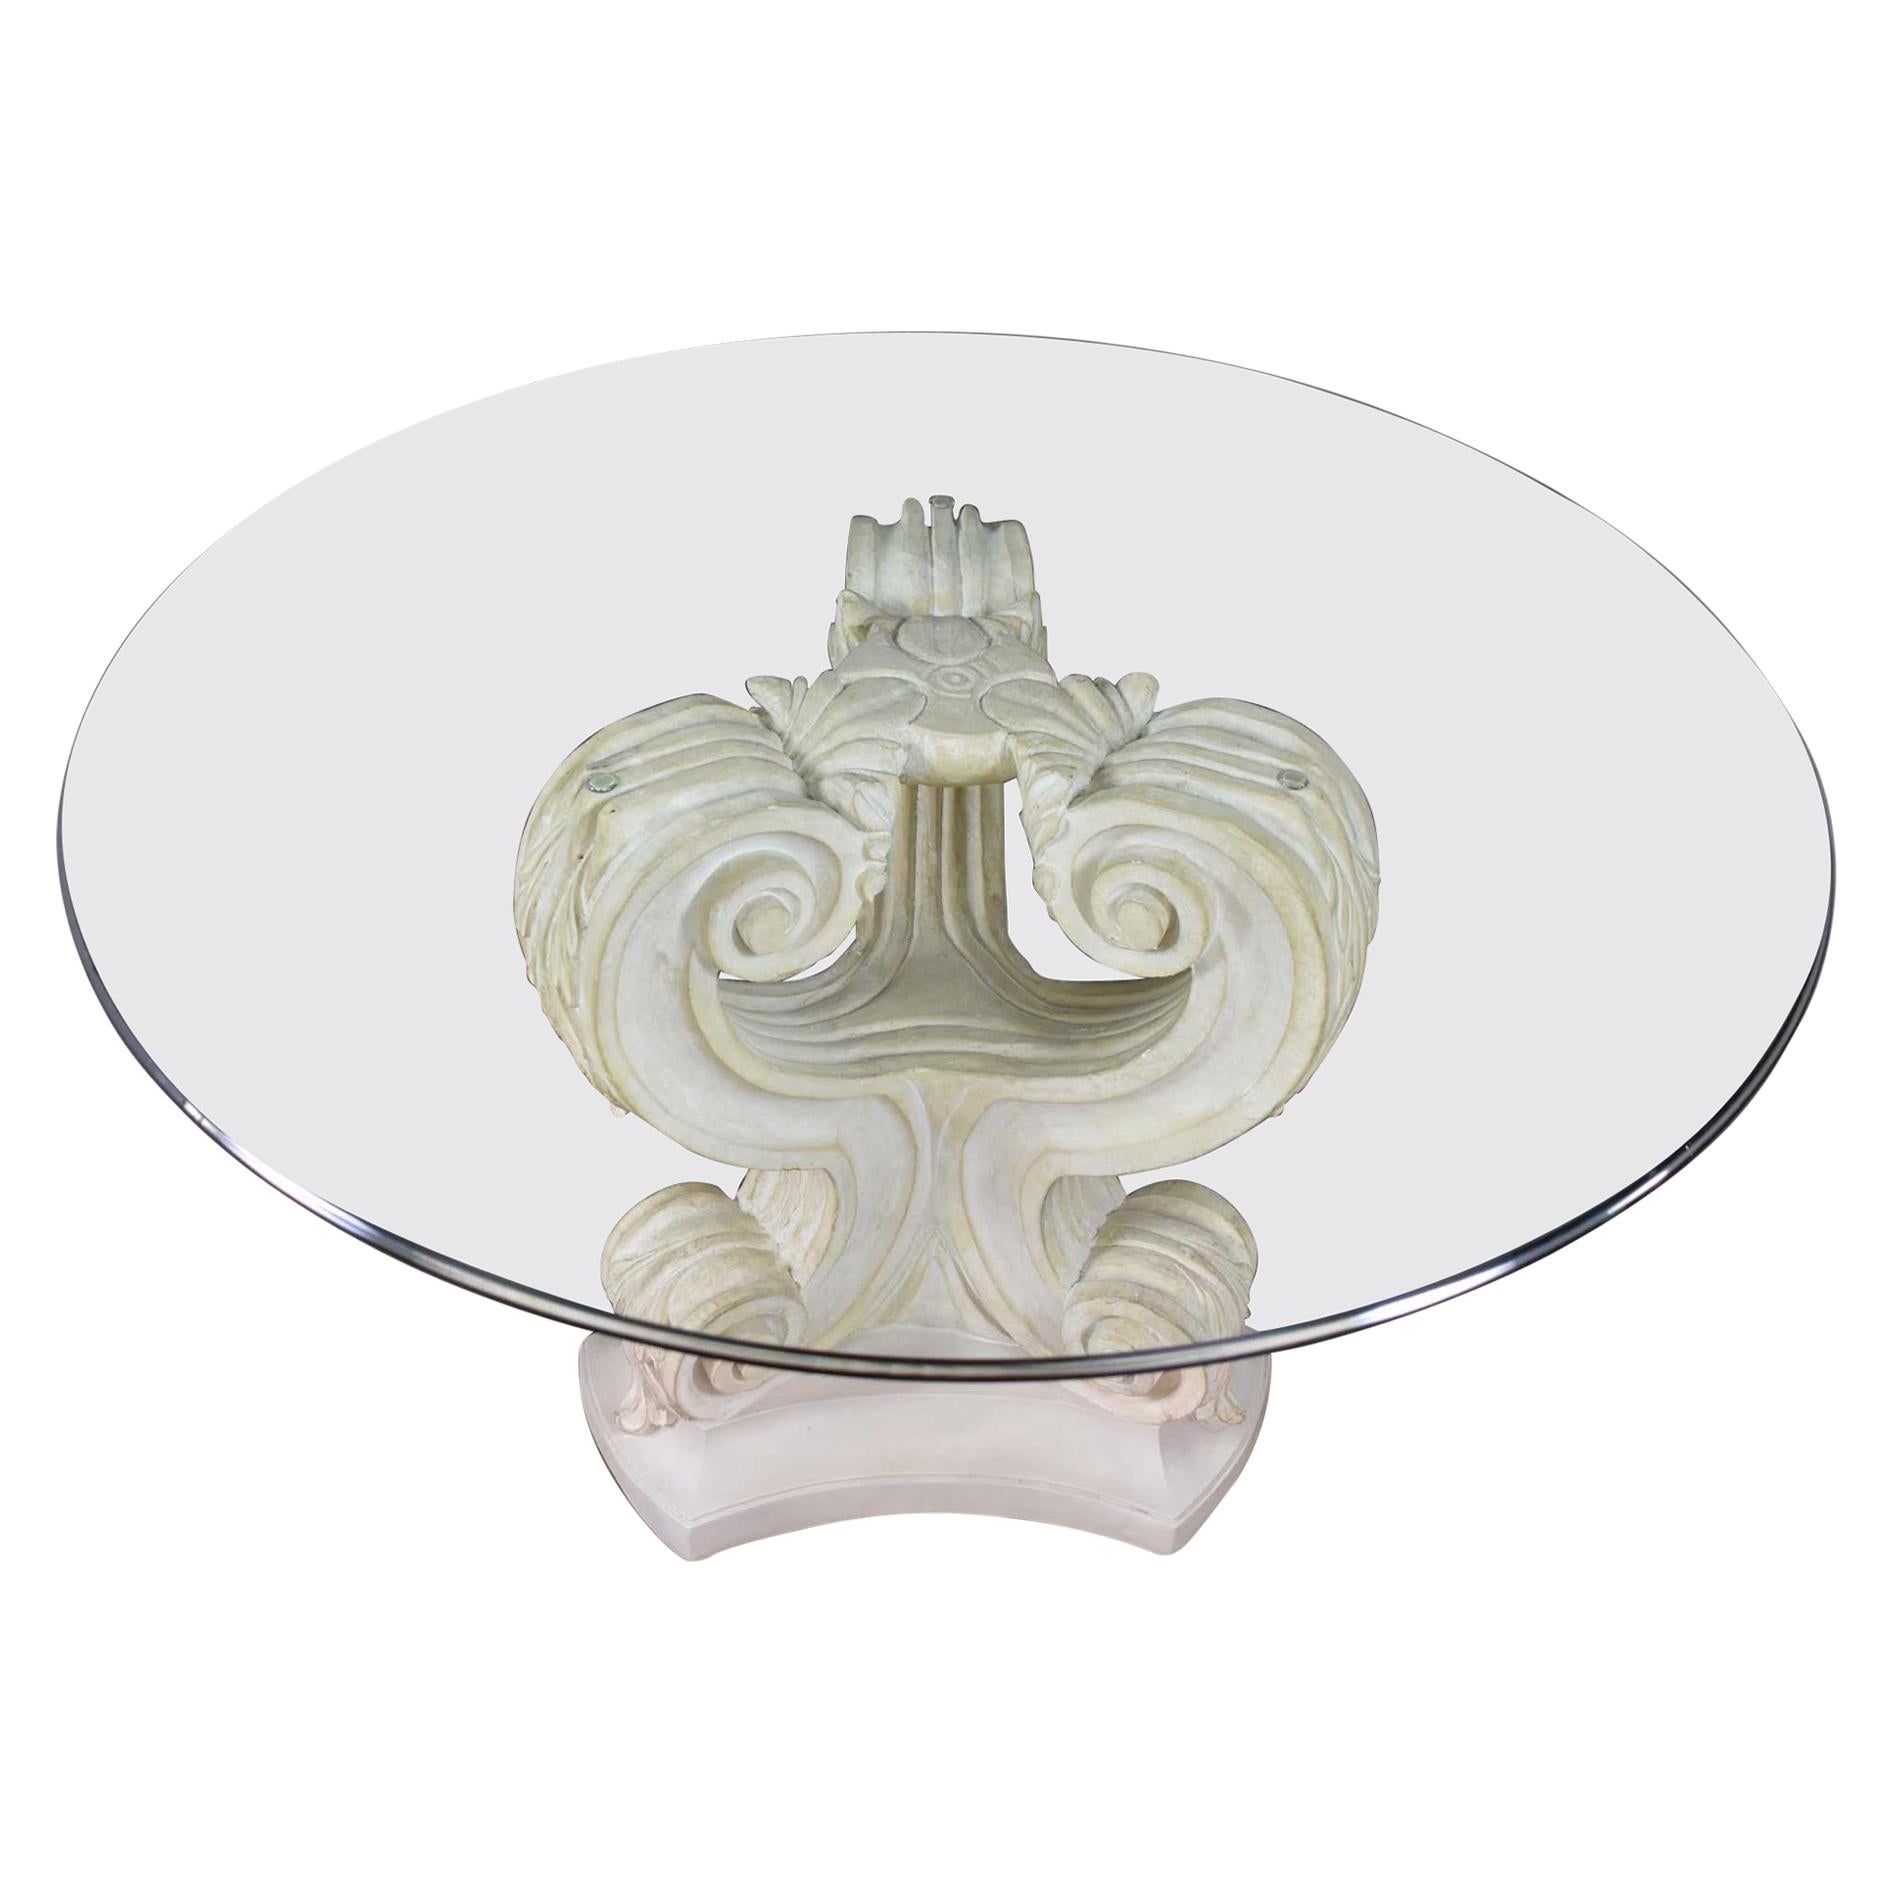 Neoclassical Architectural Plaster Pedestal Dining or Center Table Round Glass